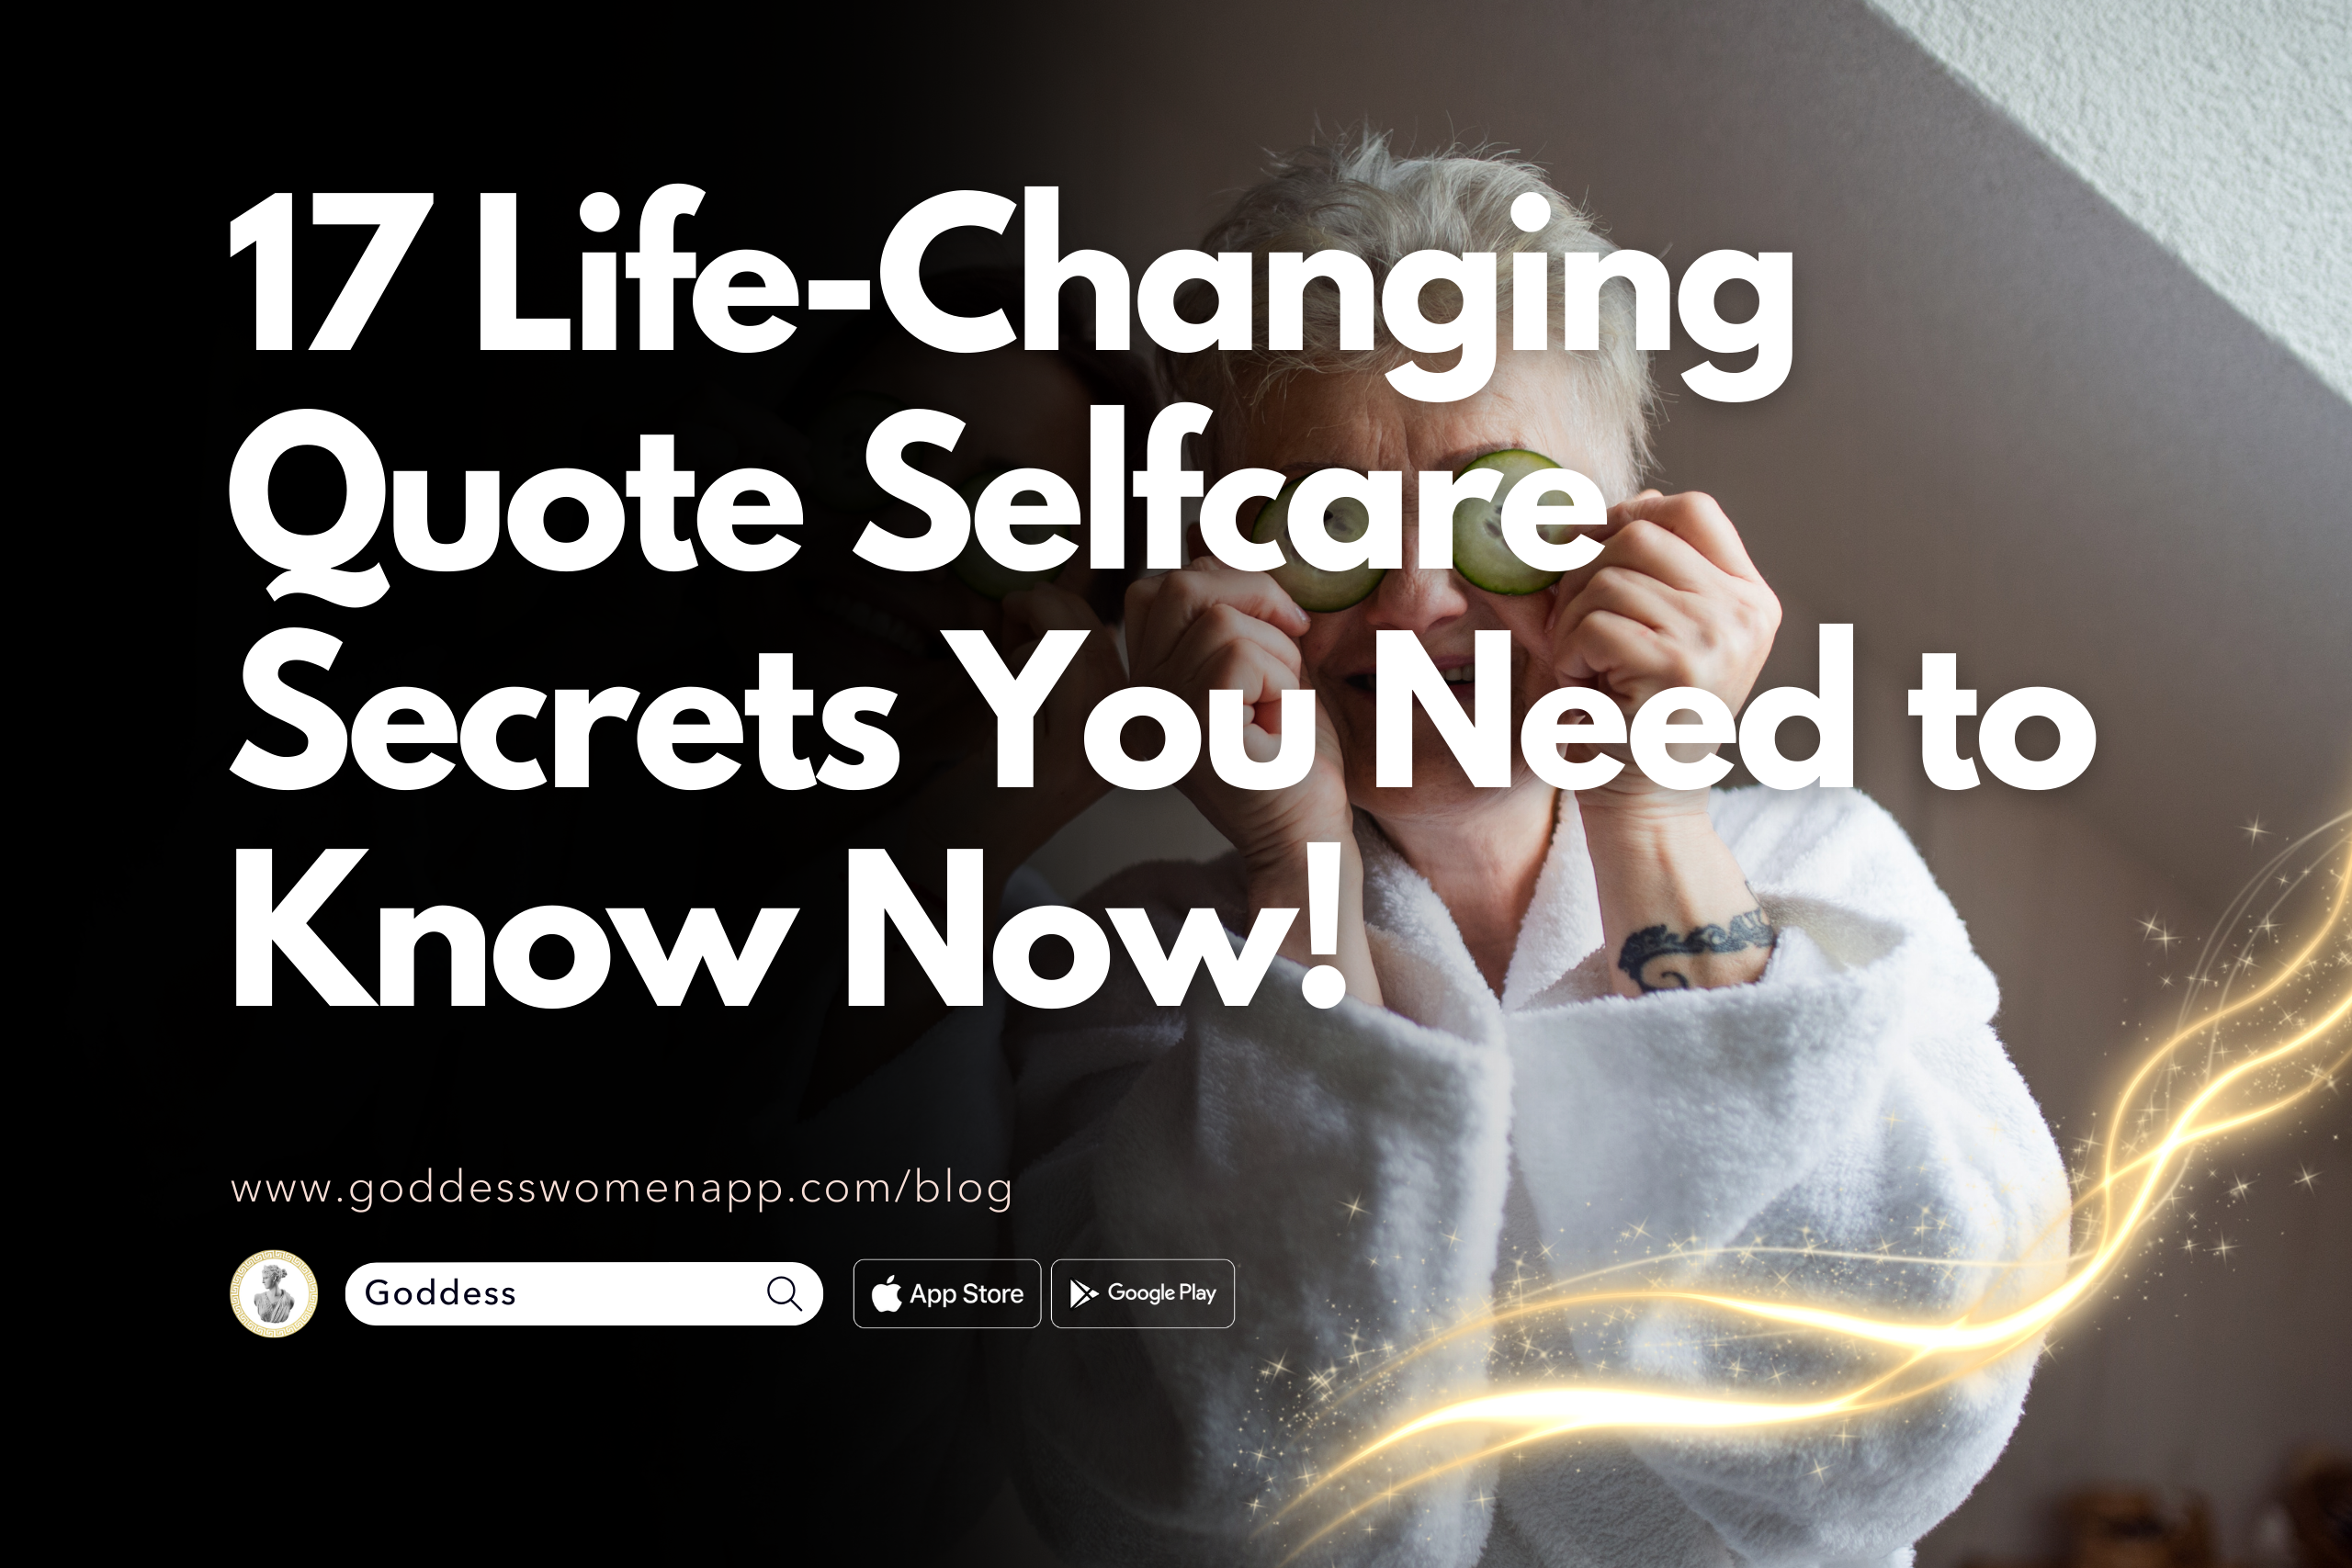 17 Life-Changing Best Quote Selfcare Secrets You Need to Know Now!